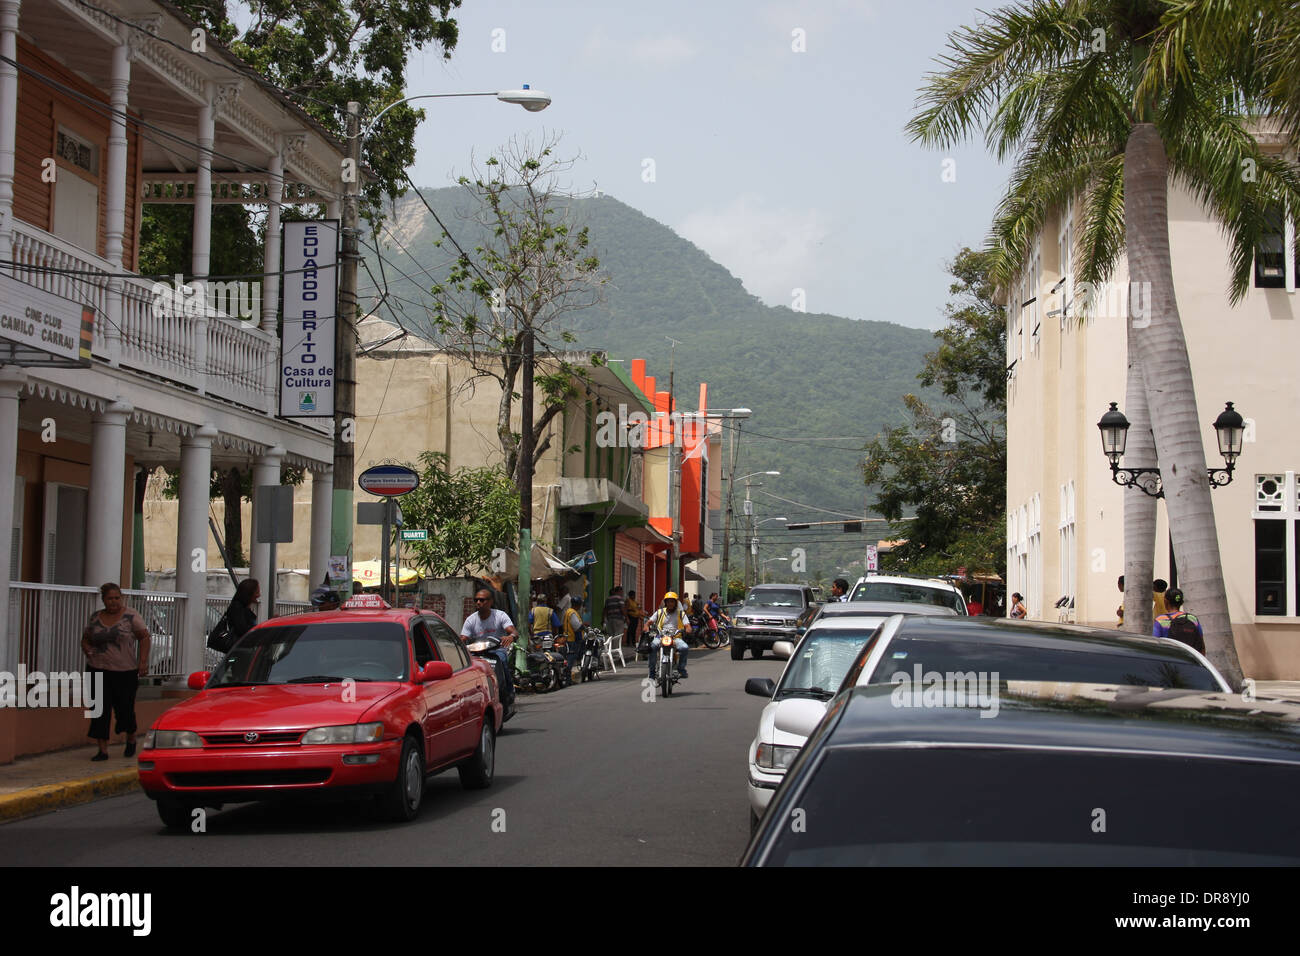 Small urban road in the city of Puerto Plata, Dominican Republic with the mountains in the background Stock Photo